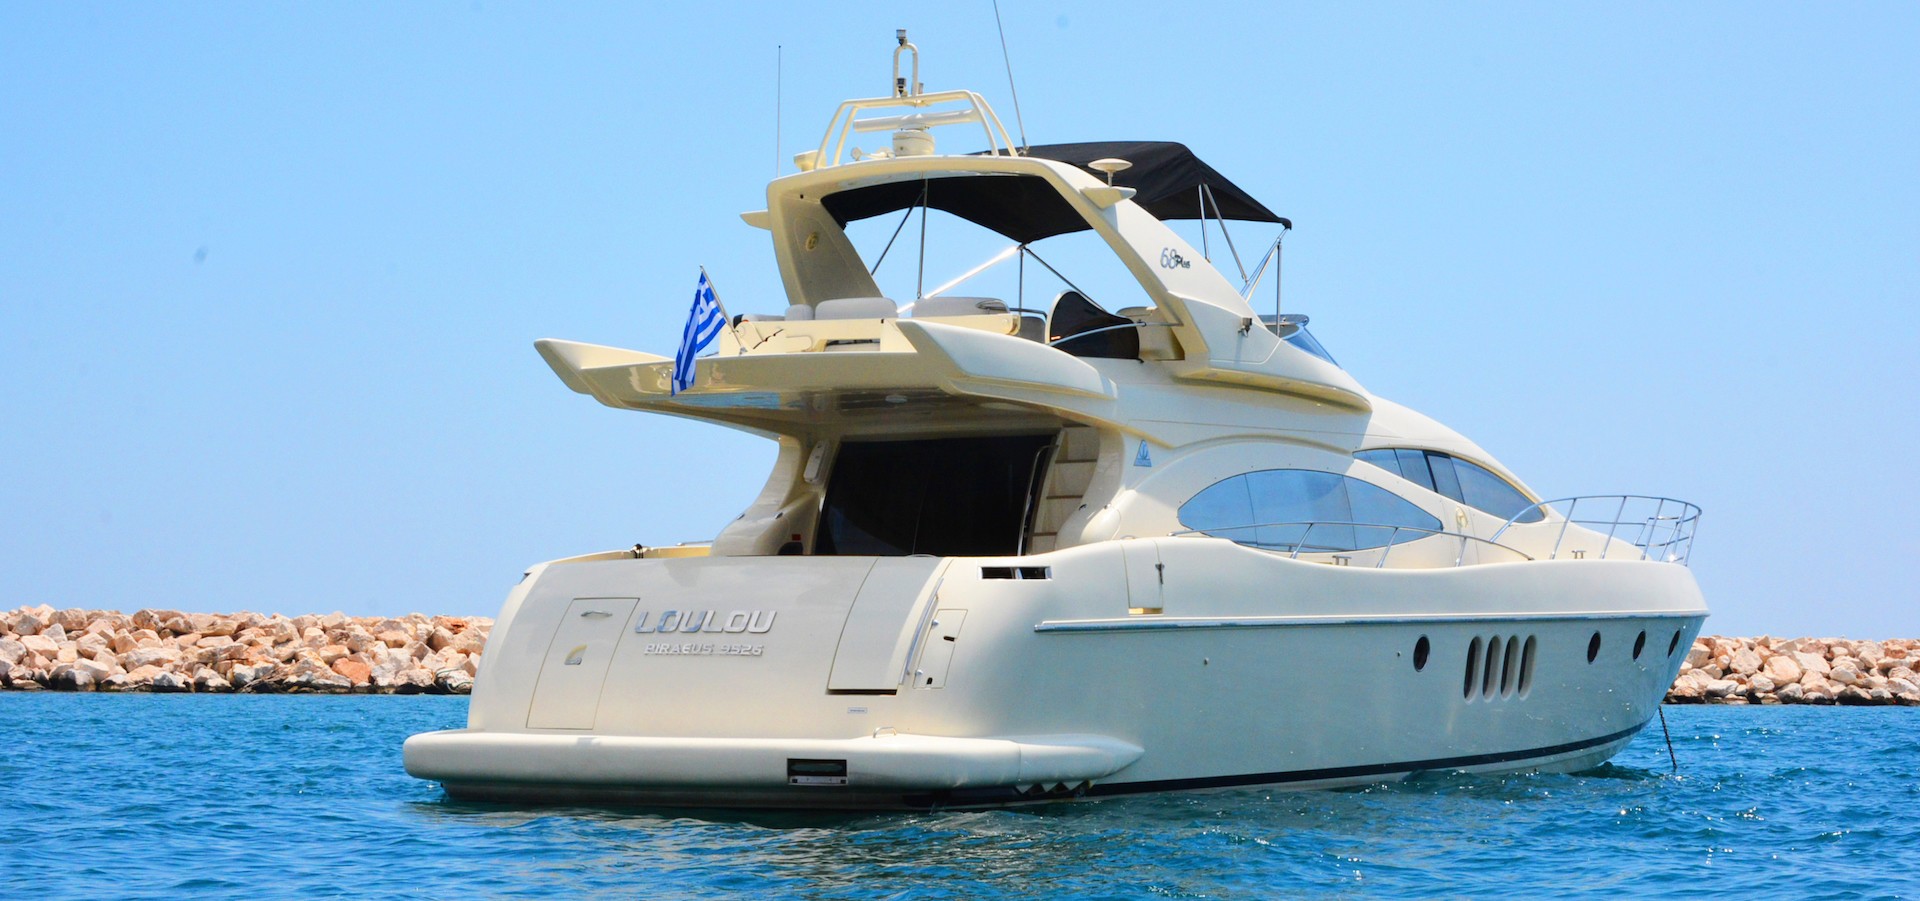 The 21m Yacht LOULOU